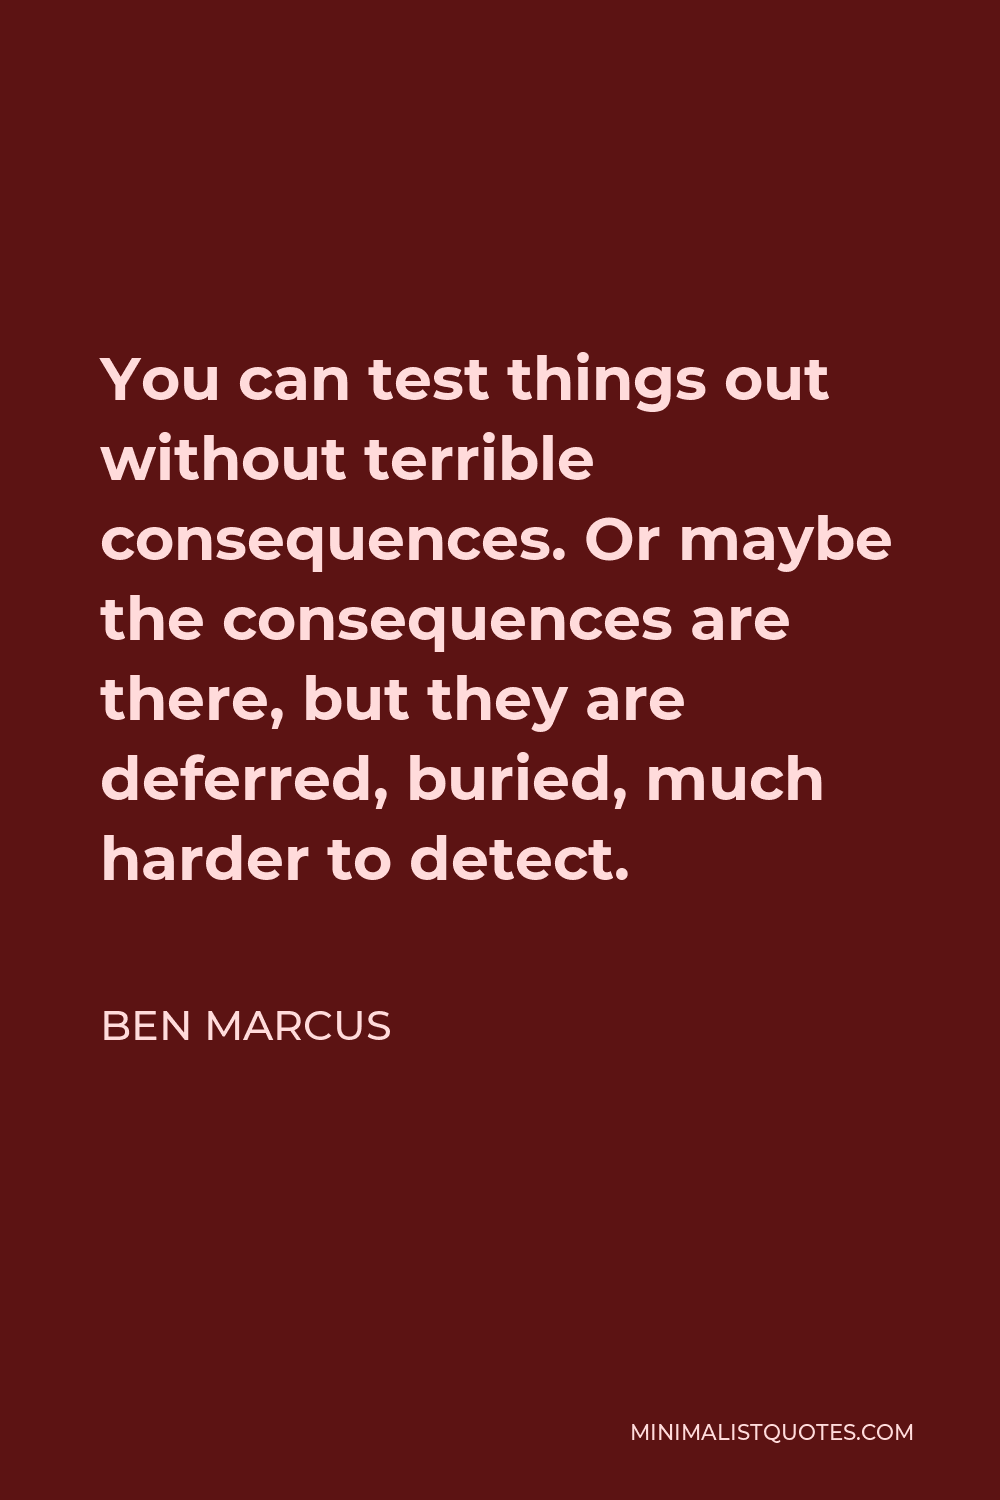 Ben Marcus Quote - You can test things out without terrible consequences. Or maybe the consequences are there, but they are deferred, buried, much harder to detect.